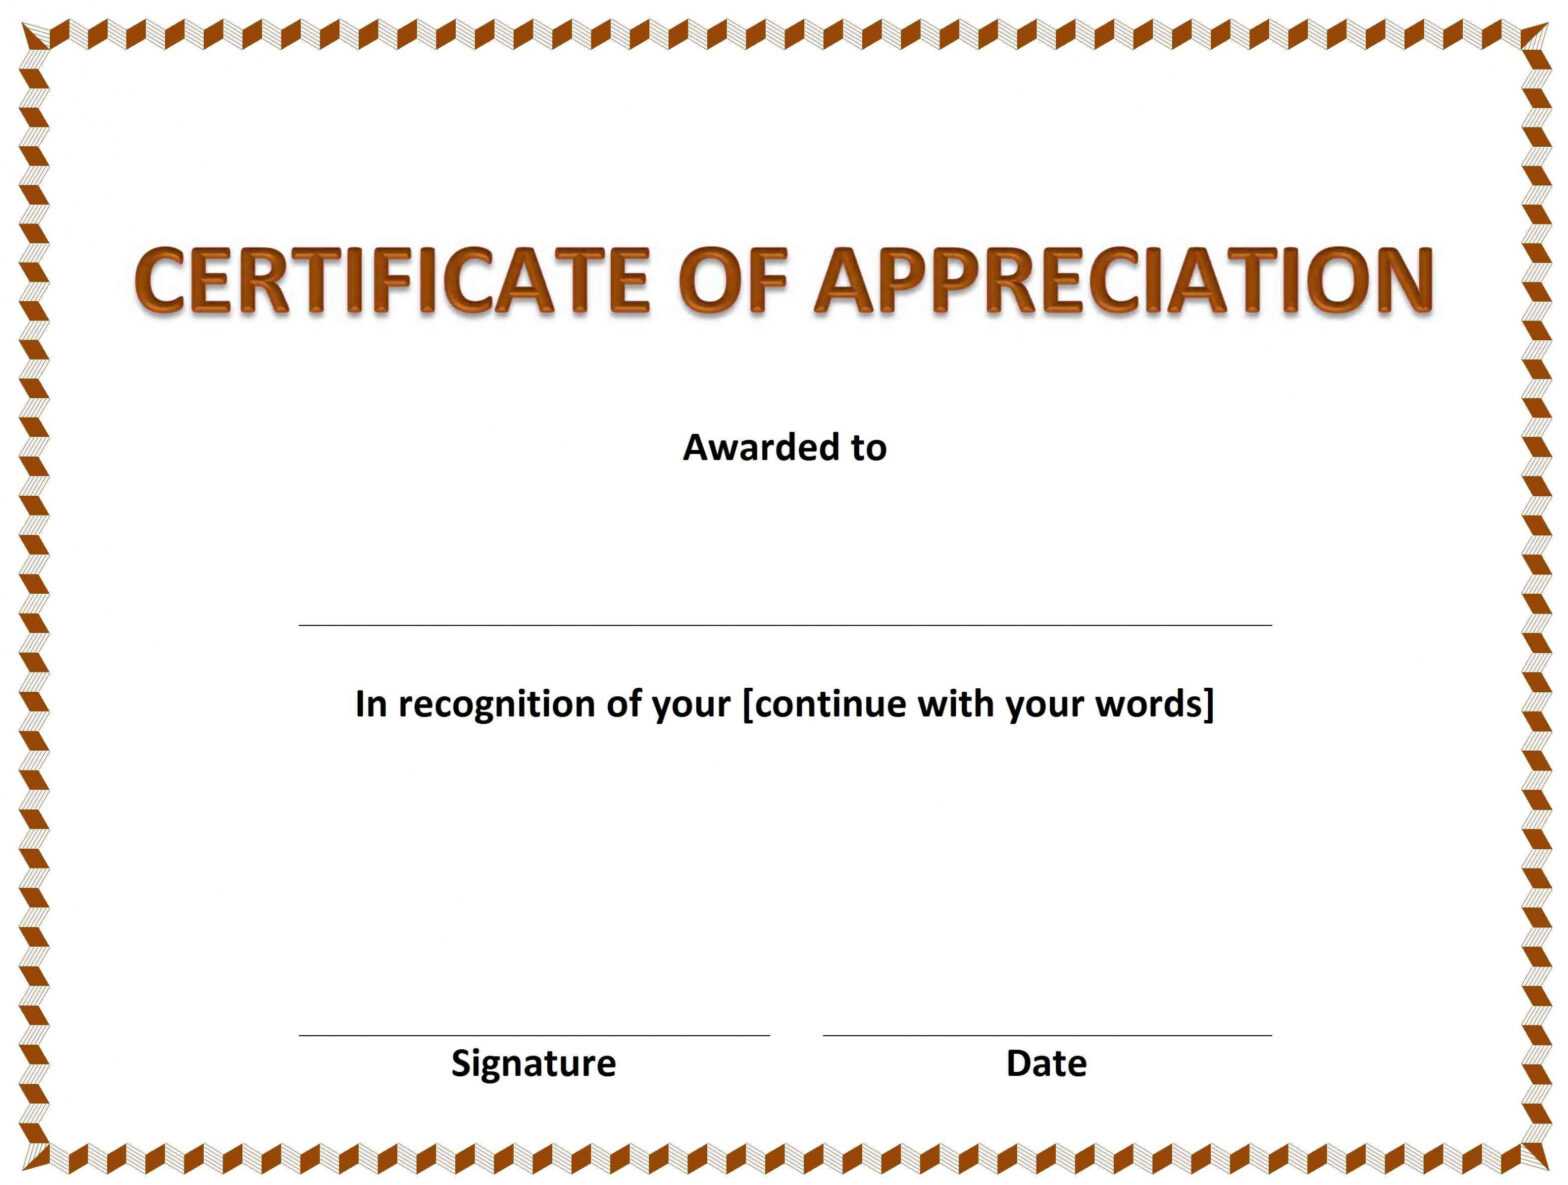 Certificate Of Appreciation » Officetemplates intended for Certificate Of Attainment Template